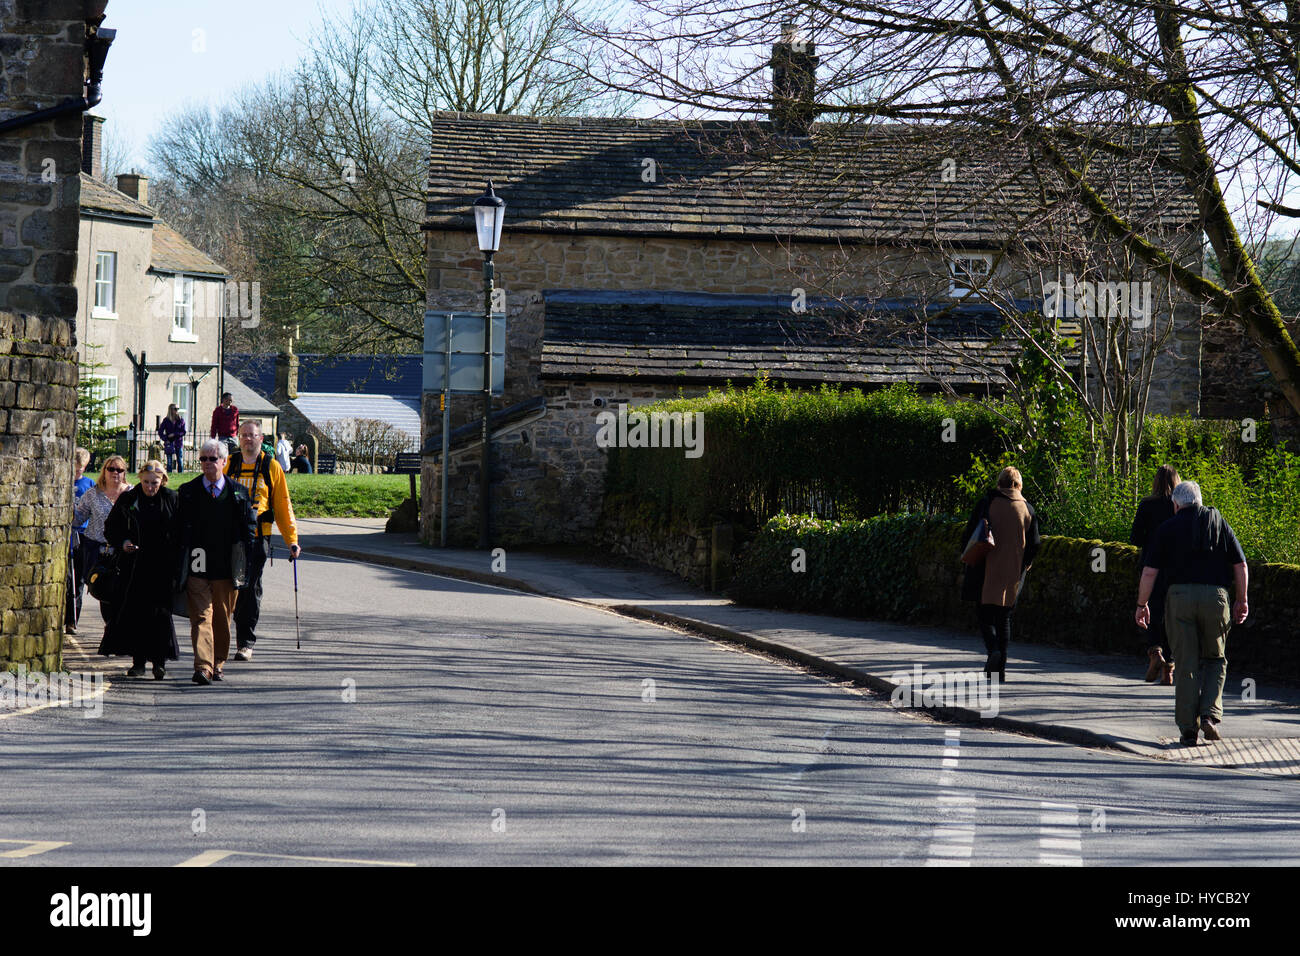 Medieval village of Eyam, better known as the plague village, peak district Derbyshire England Stock Photo